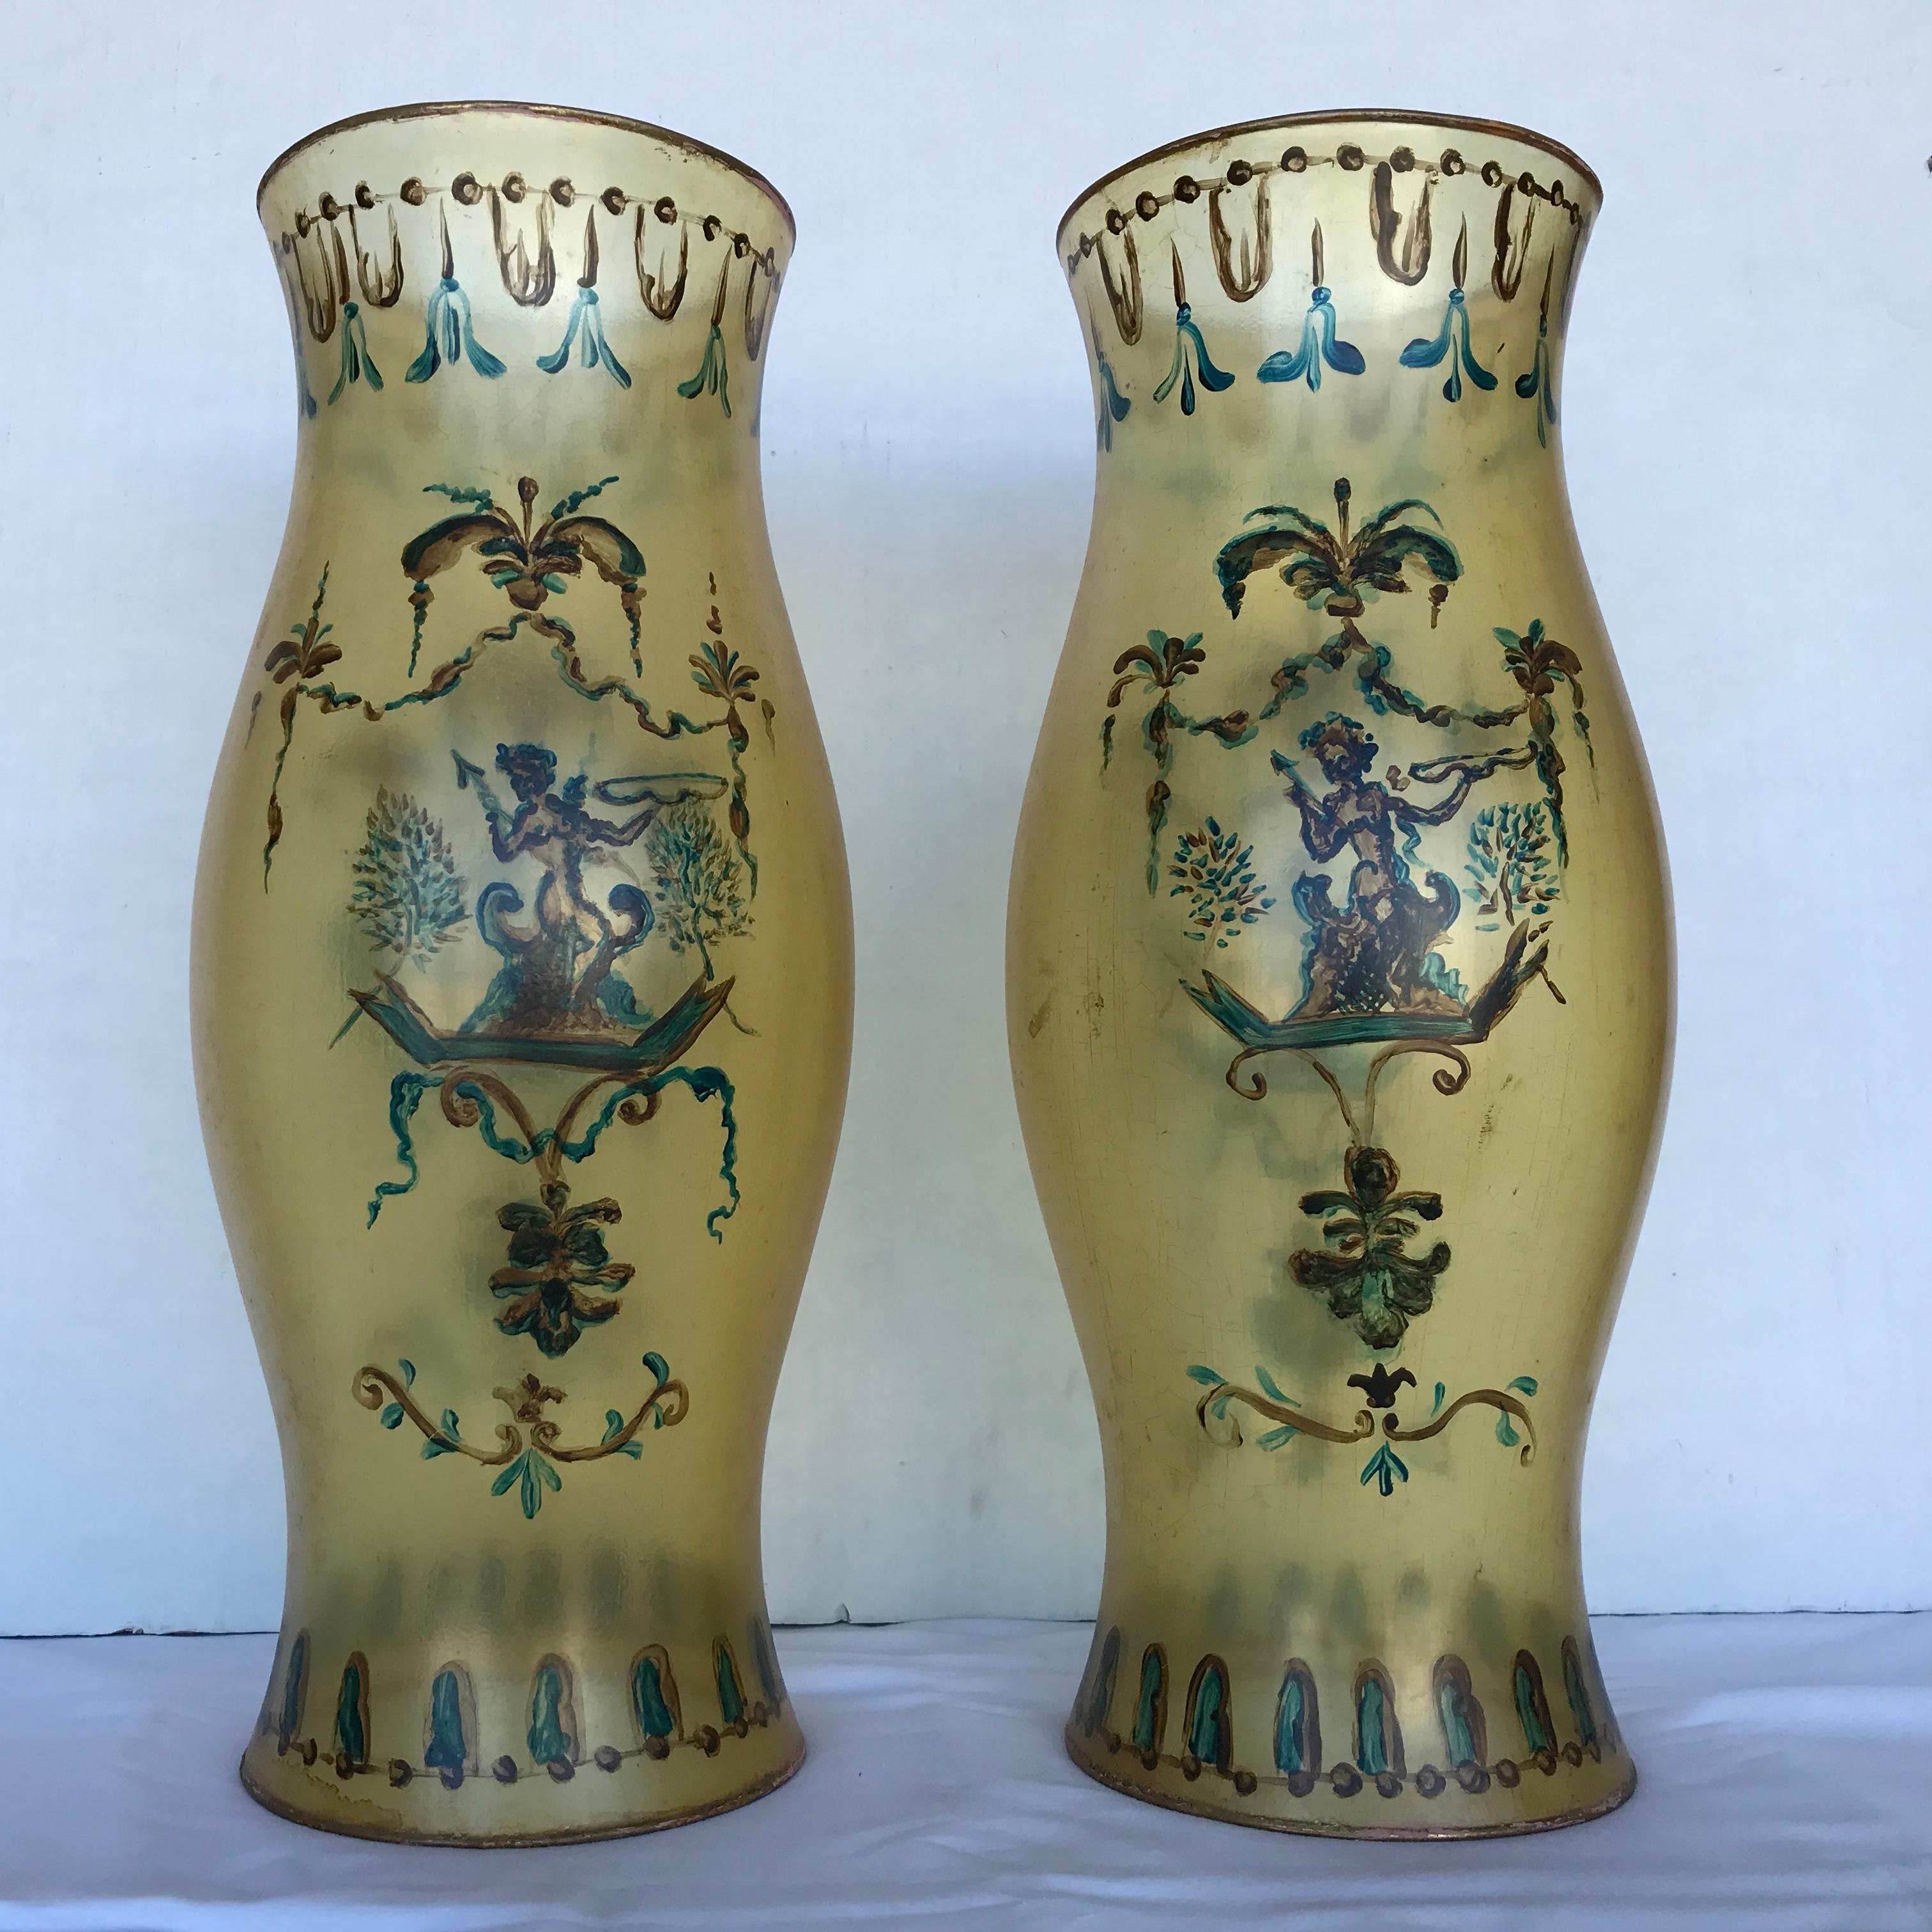 Wonderful greenish yellow color - hand painted with fanciful male and female figures
playing musical instruments.
 